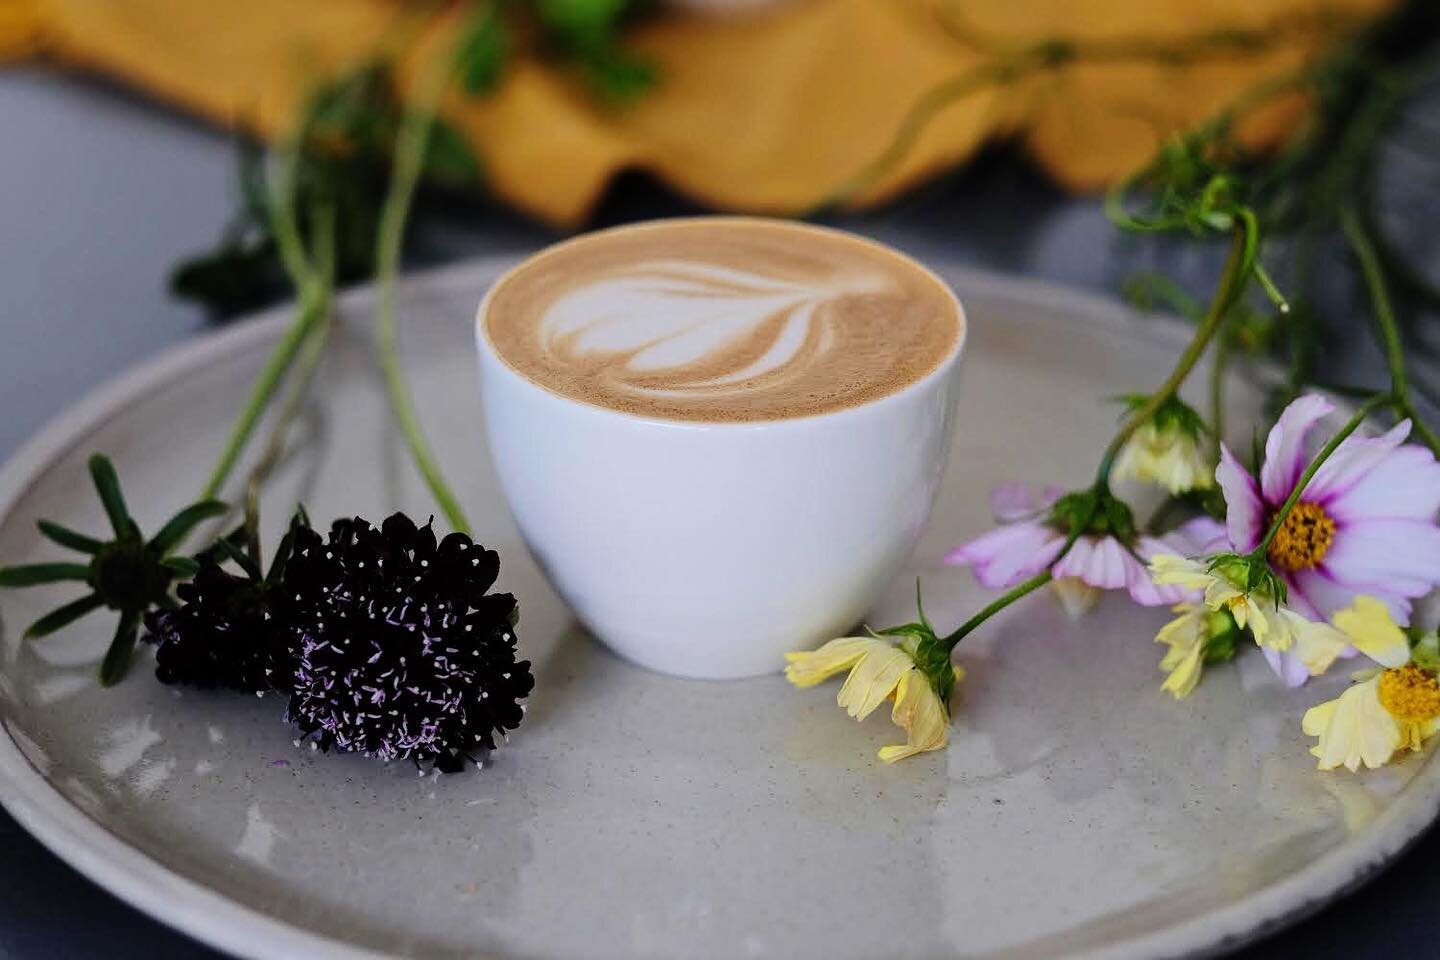 We are kicking the Monday blues with some @legadocoffee and @merkava_coffee coffee 💥 and some of @jamestownflowerfarm flowers because autumn is creeping in 🍂